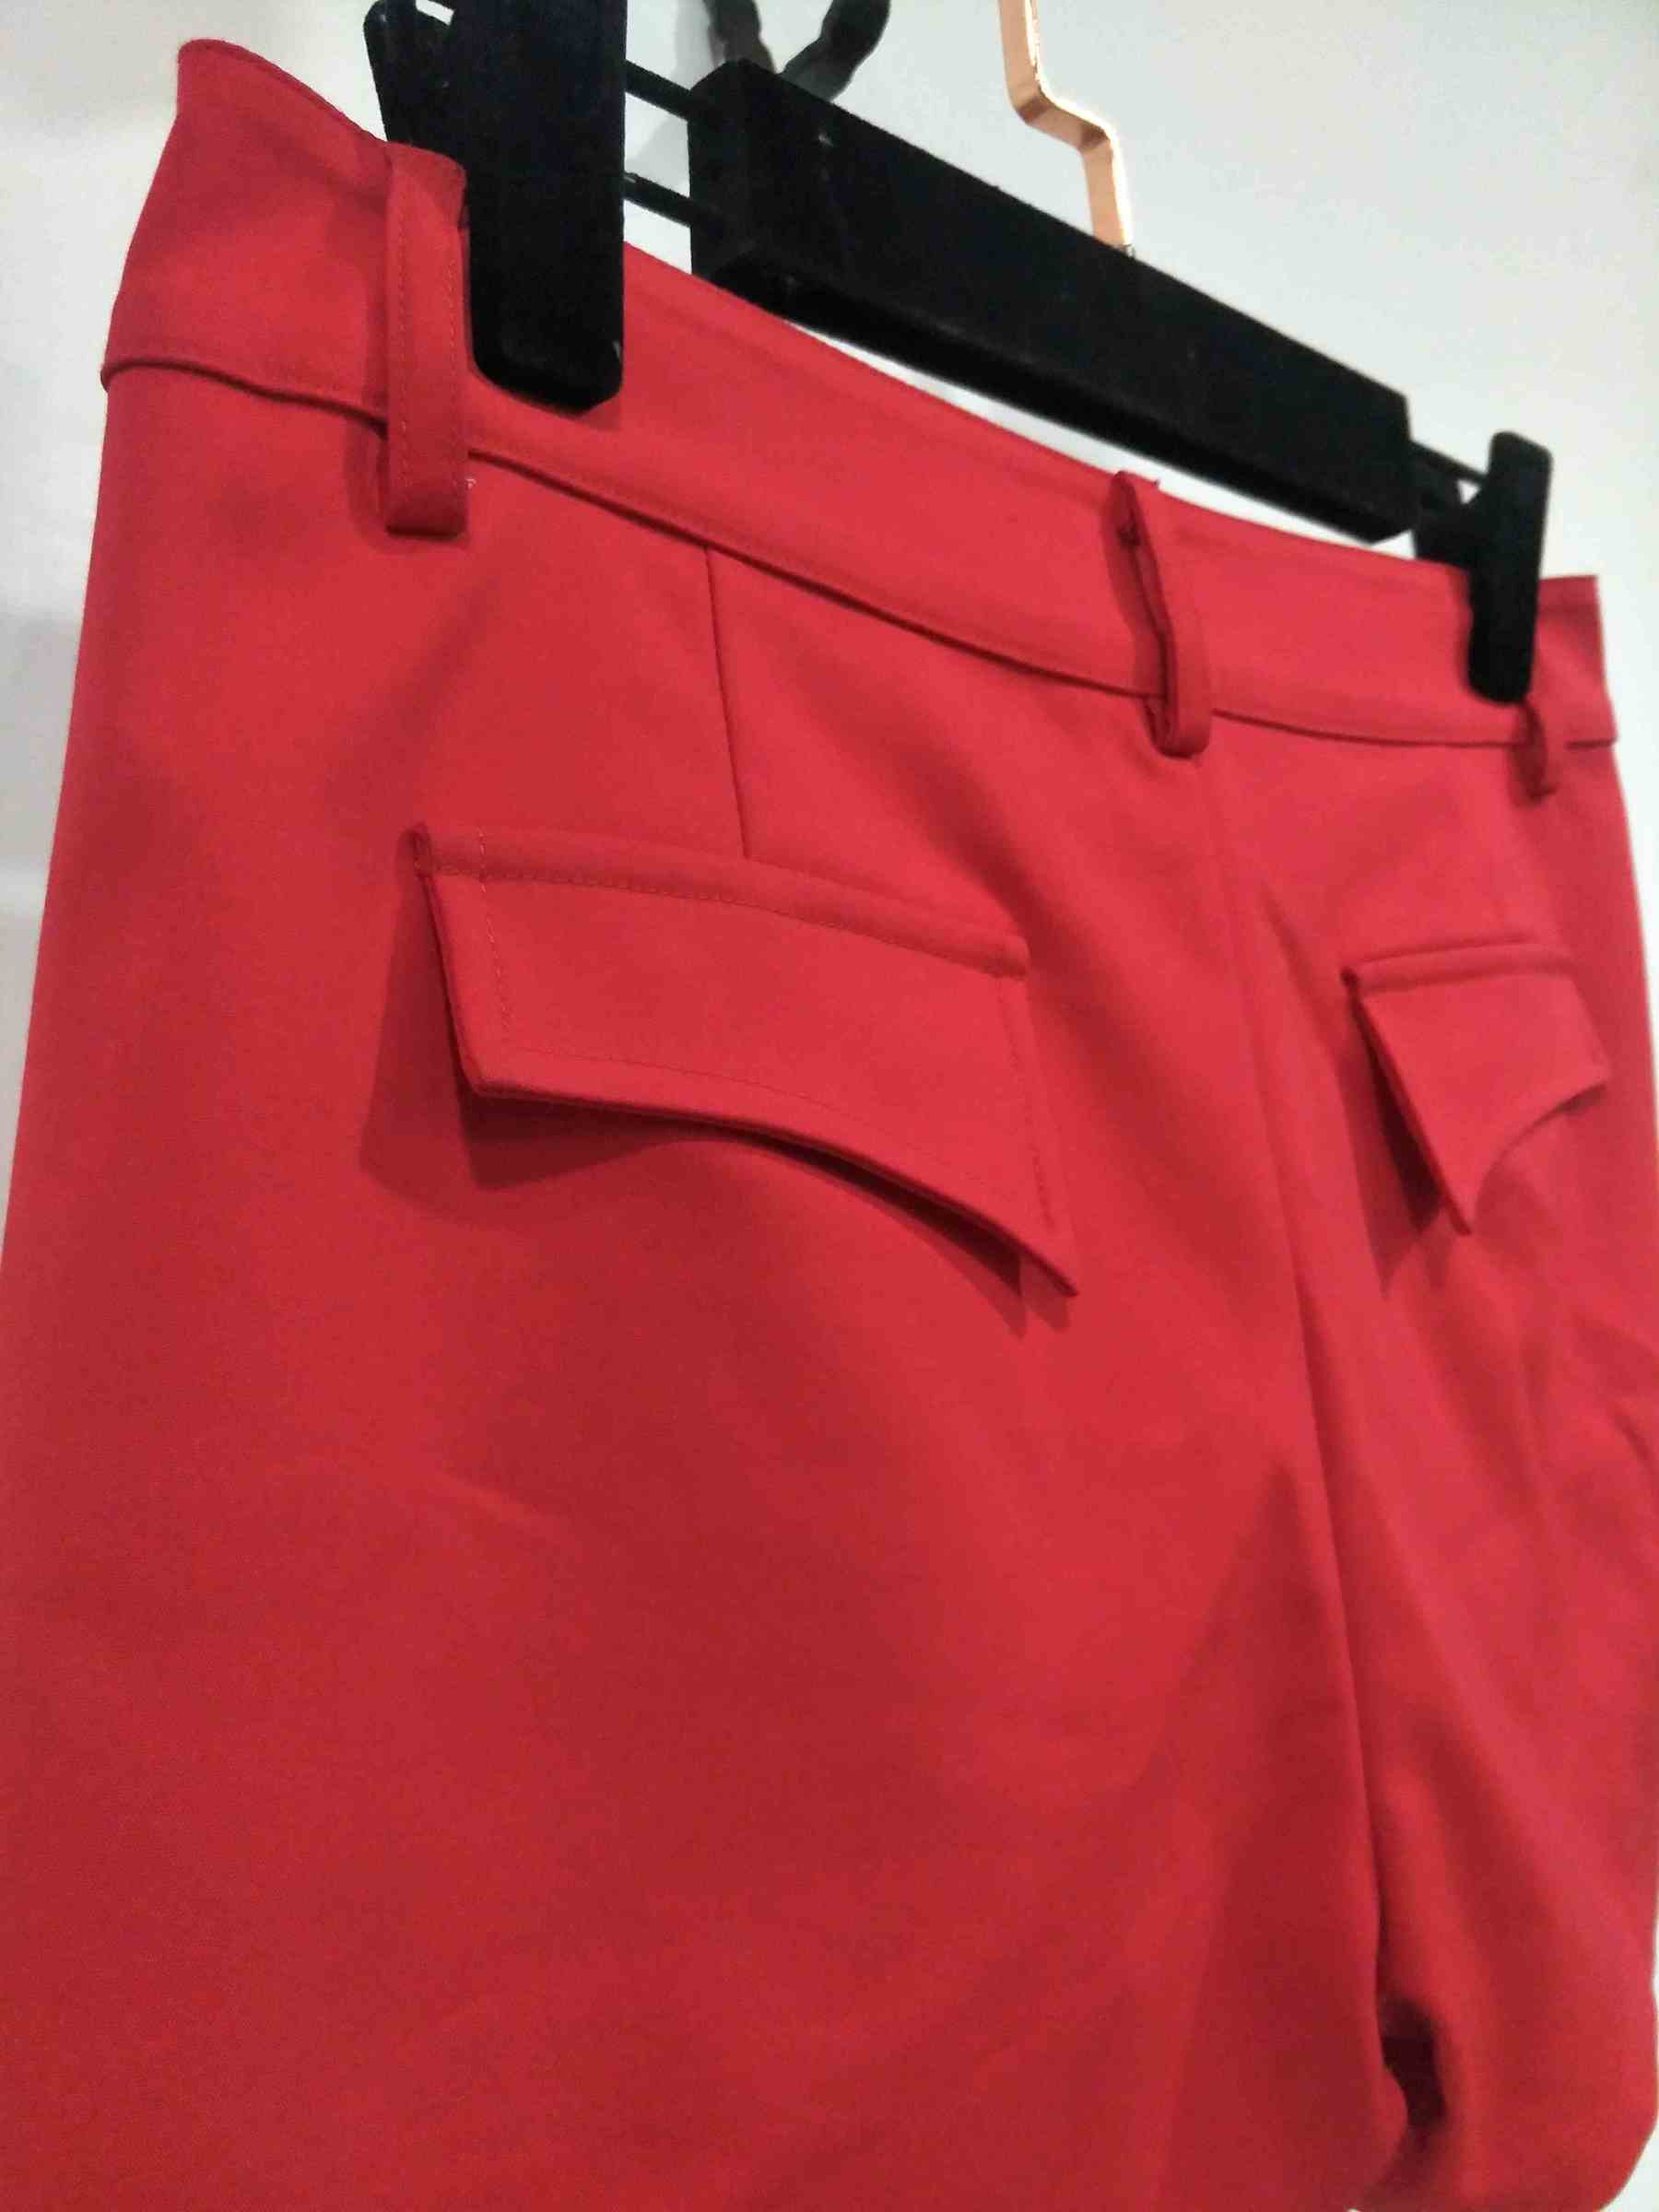 Latest red shorts designer fashion with casual shorts style button on pocket for cheap shorts odm oem service (7).jpg